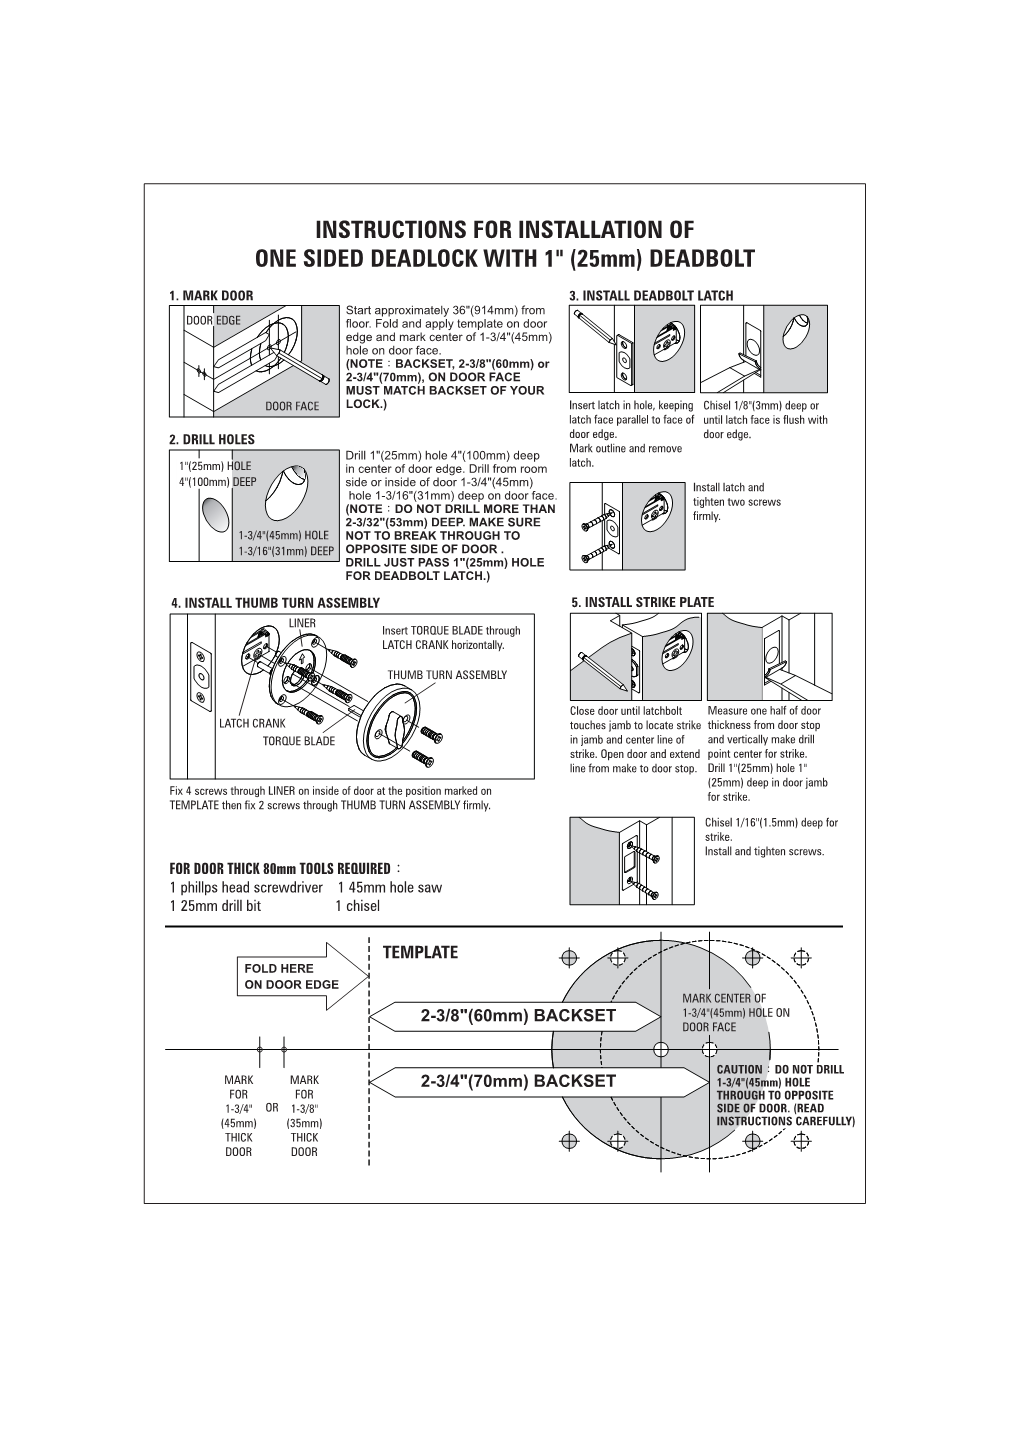 INSTRUCTIONS for INSTALLATION of ONE SIDED DEADLOCK with 1" (25Mm) DEADBOLT